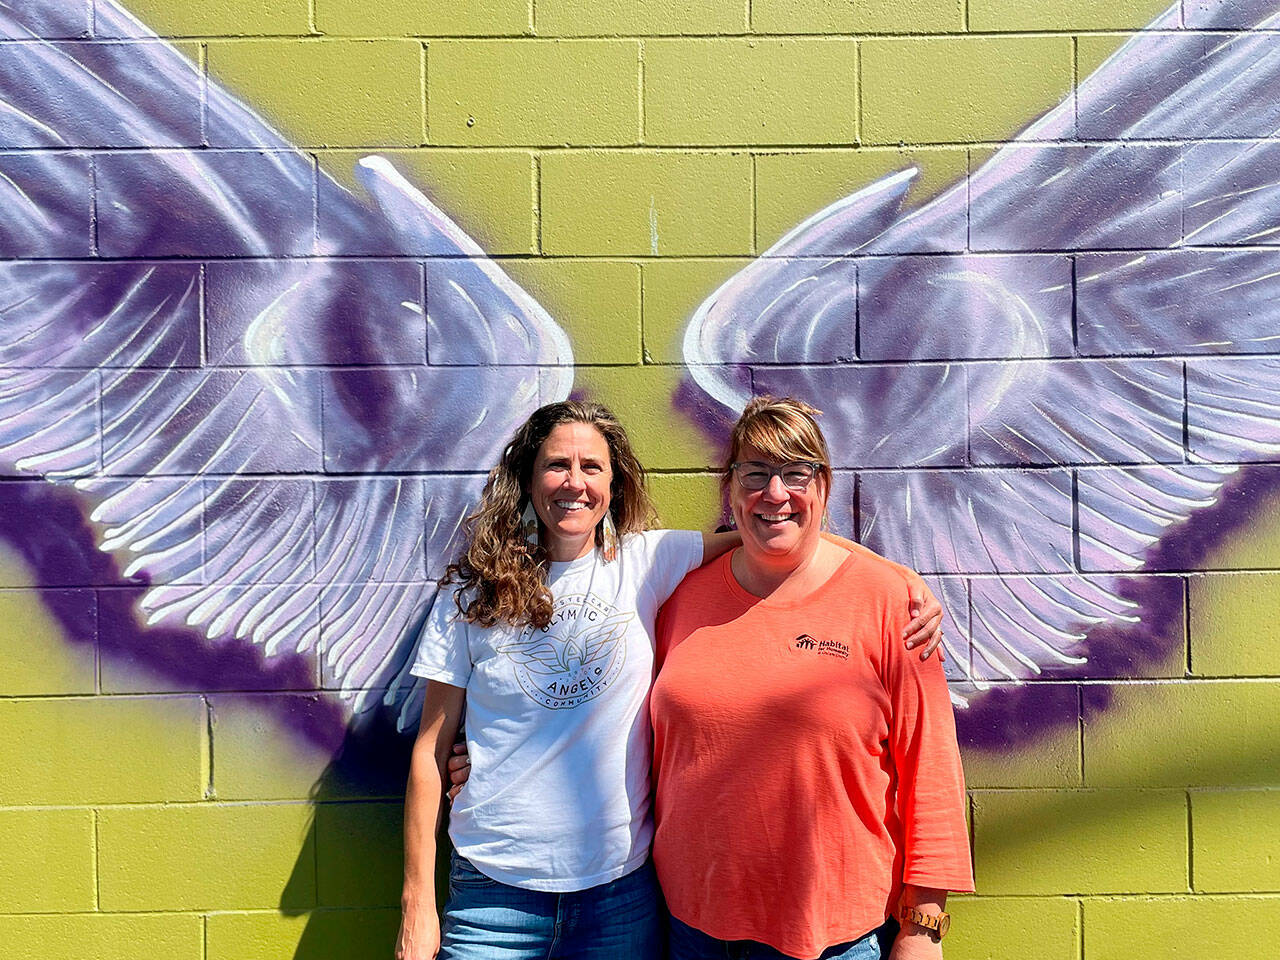 Sequim Gazette photo by Matthew Nash/ A new mural by Craig Robinson in downtown Sequim represents a new partnership between Olympic Angels and Habitat for Humanity of Clallam County. Executive director Morgan Hanna with Olympic Angels, on left, said they seek volunteers and mentors to help foster families. Colleen Robinson, chief executive officer for Habitat, said people are welcome to take photos on the wall of Habitat’s Boutique Store and they’ll place a sandwich board sign with information outside, and provide pamphlets about Olympic Angels during business hours.